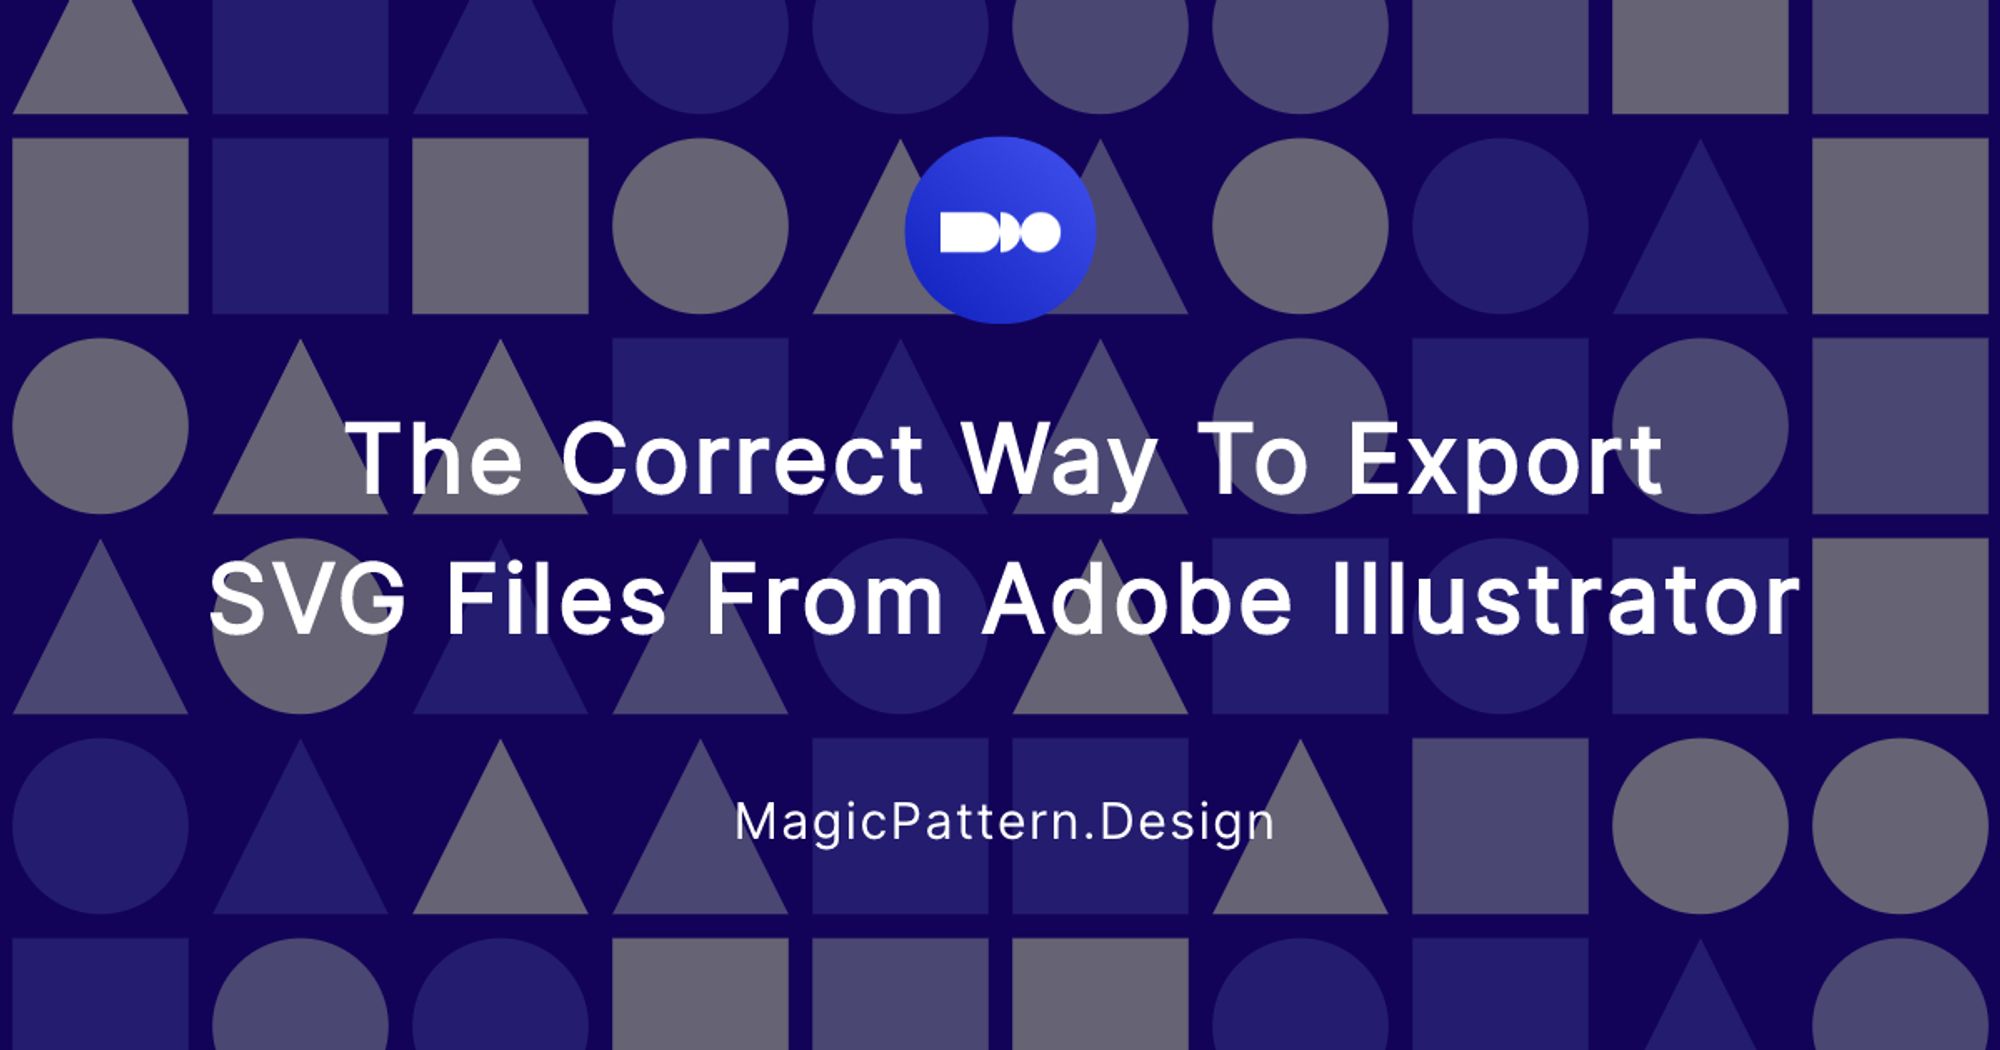 The correct way to export SVG Files From Adobe Illustrator